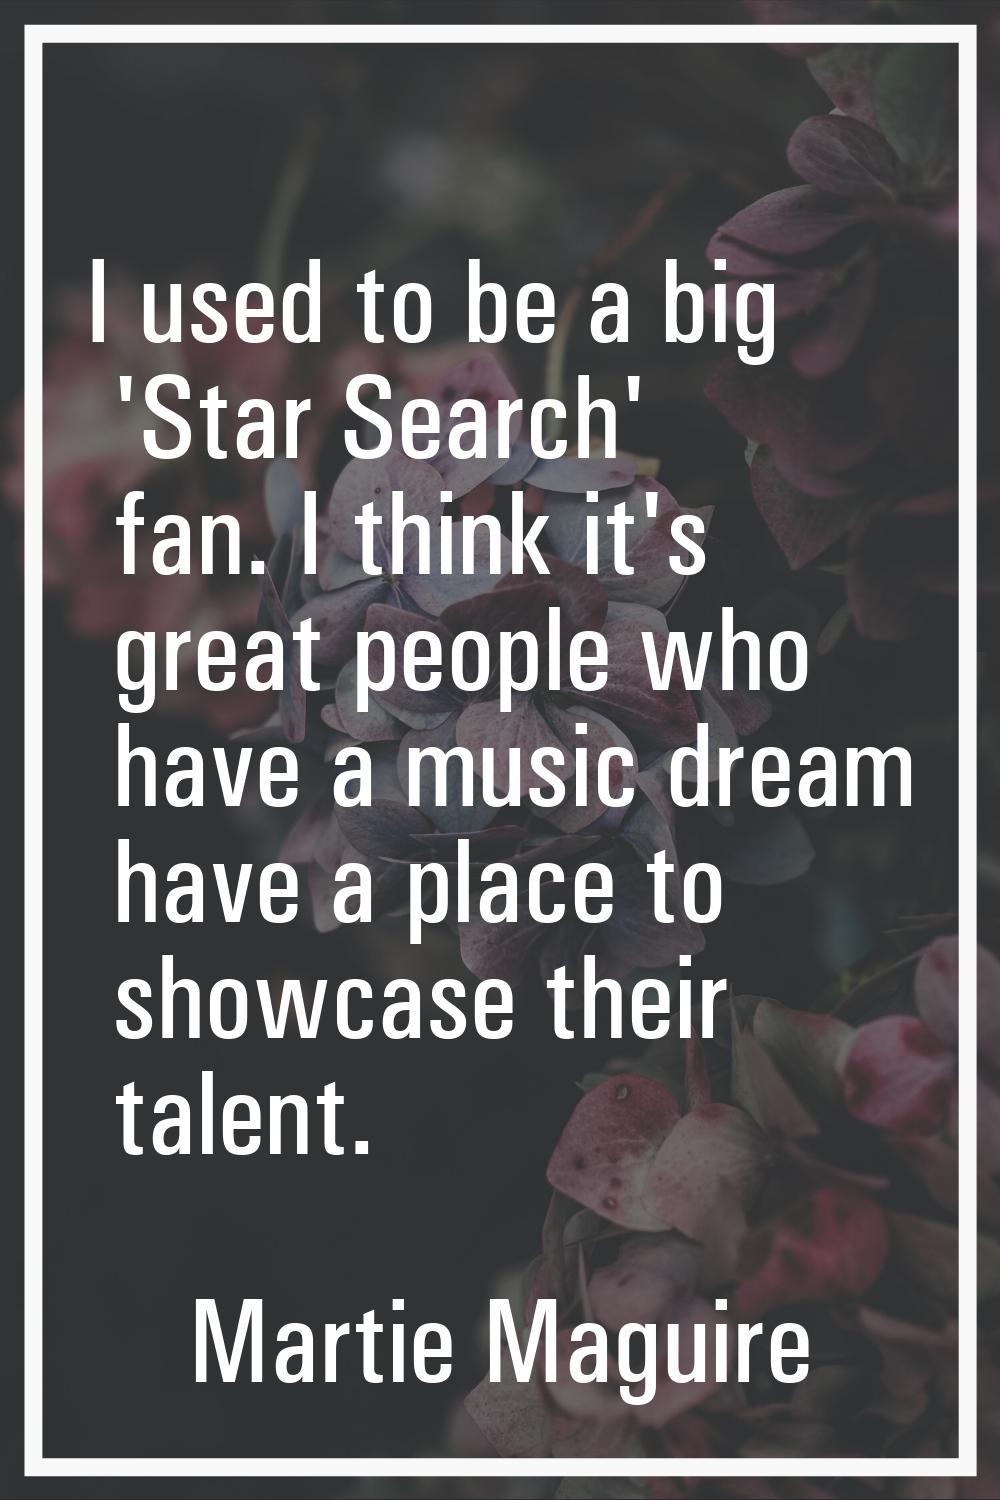 I used to be a big 'Star Search' fan. I think it's great people who have a music dream have a place